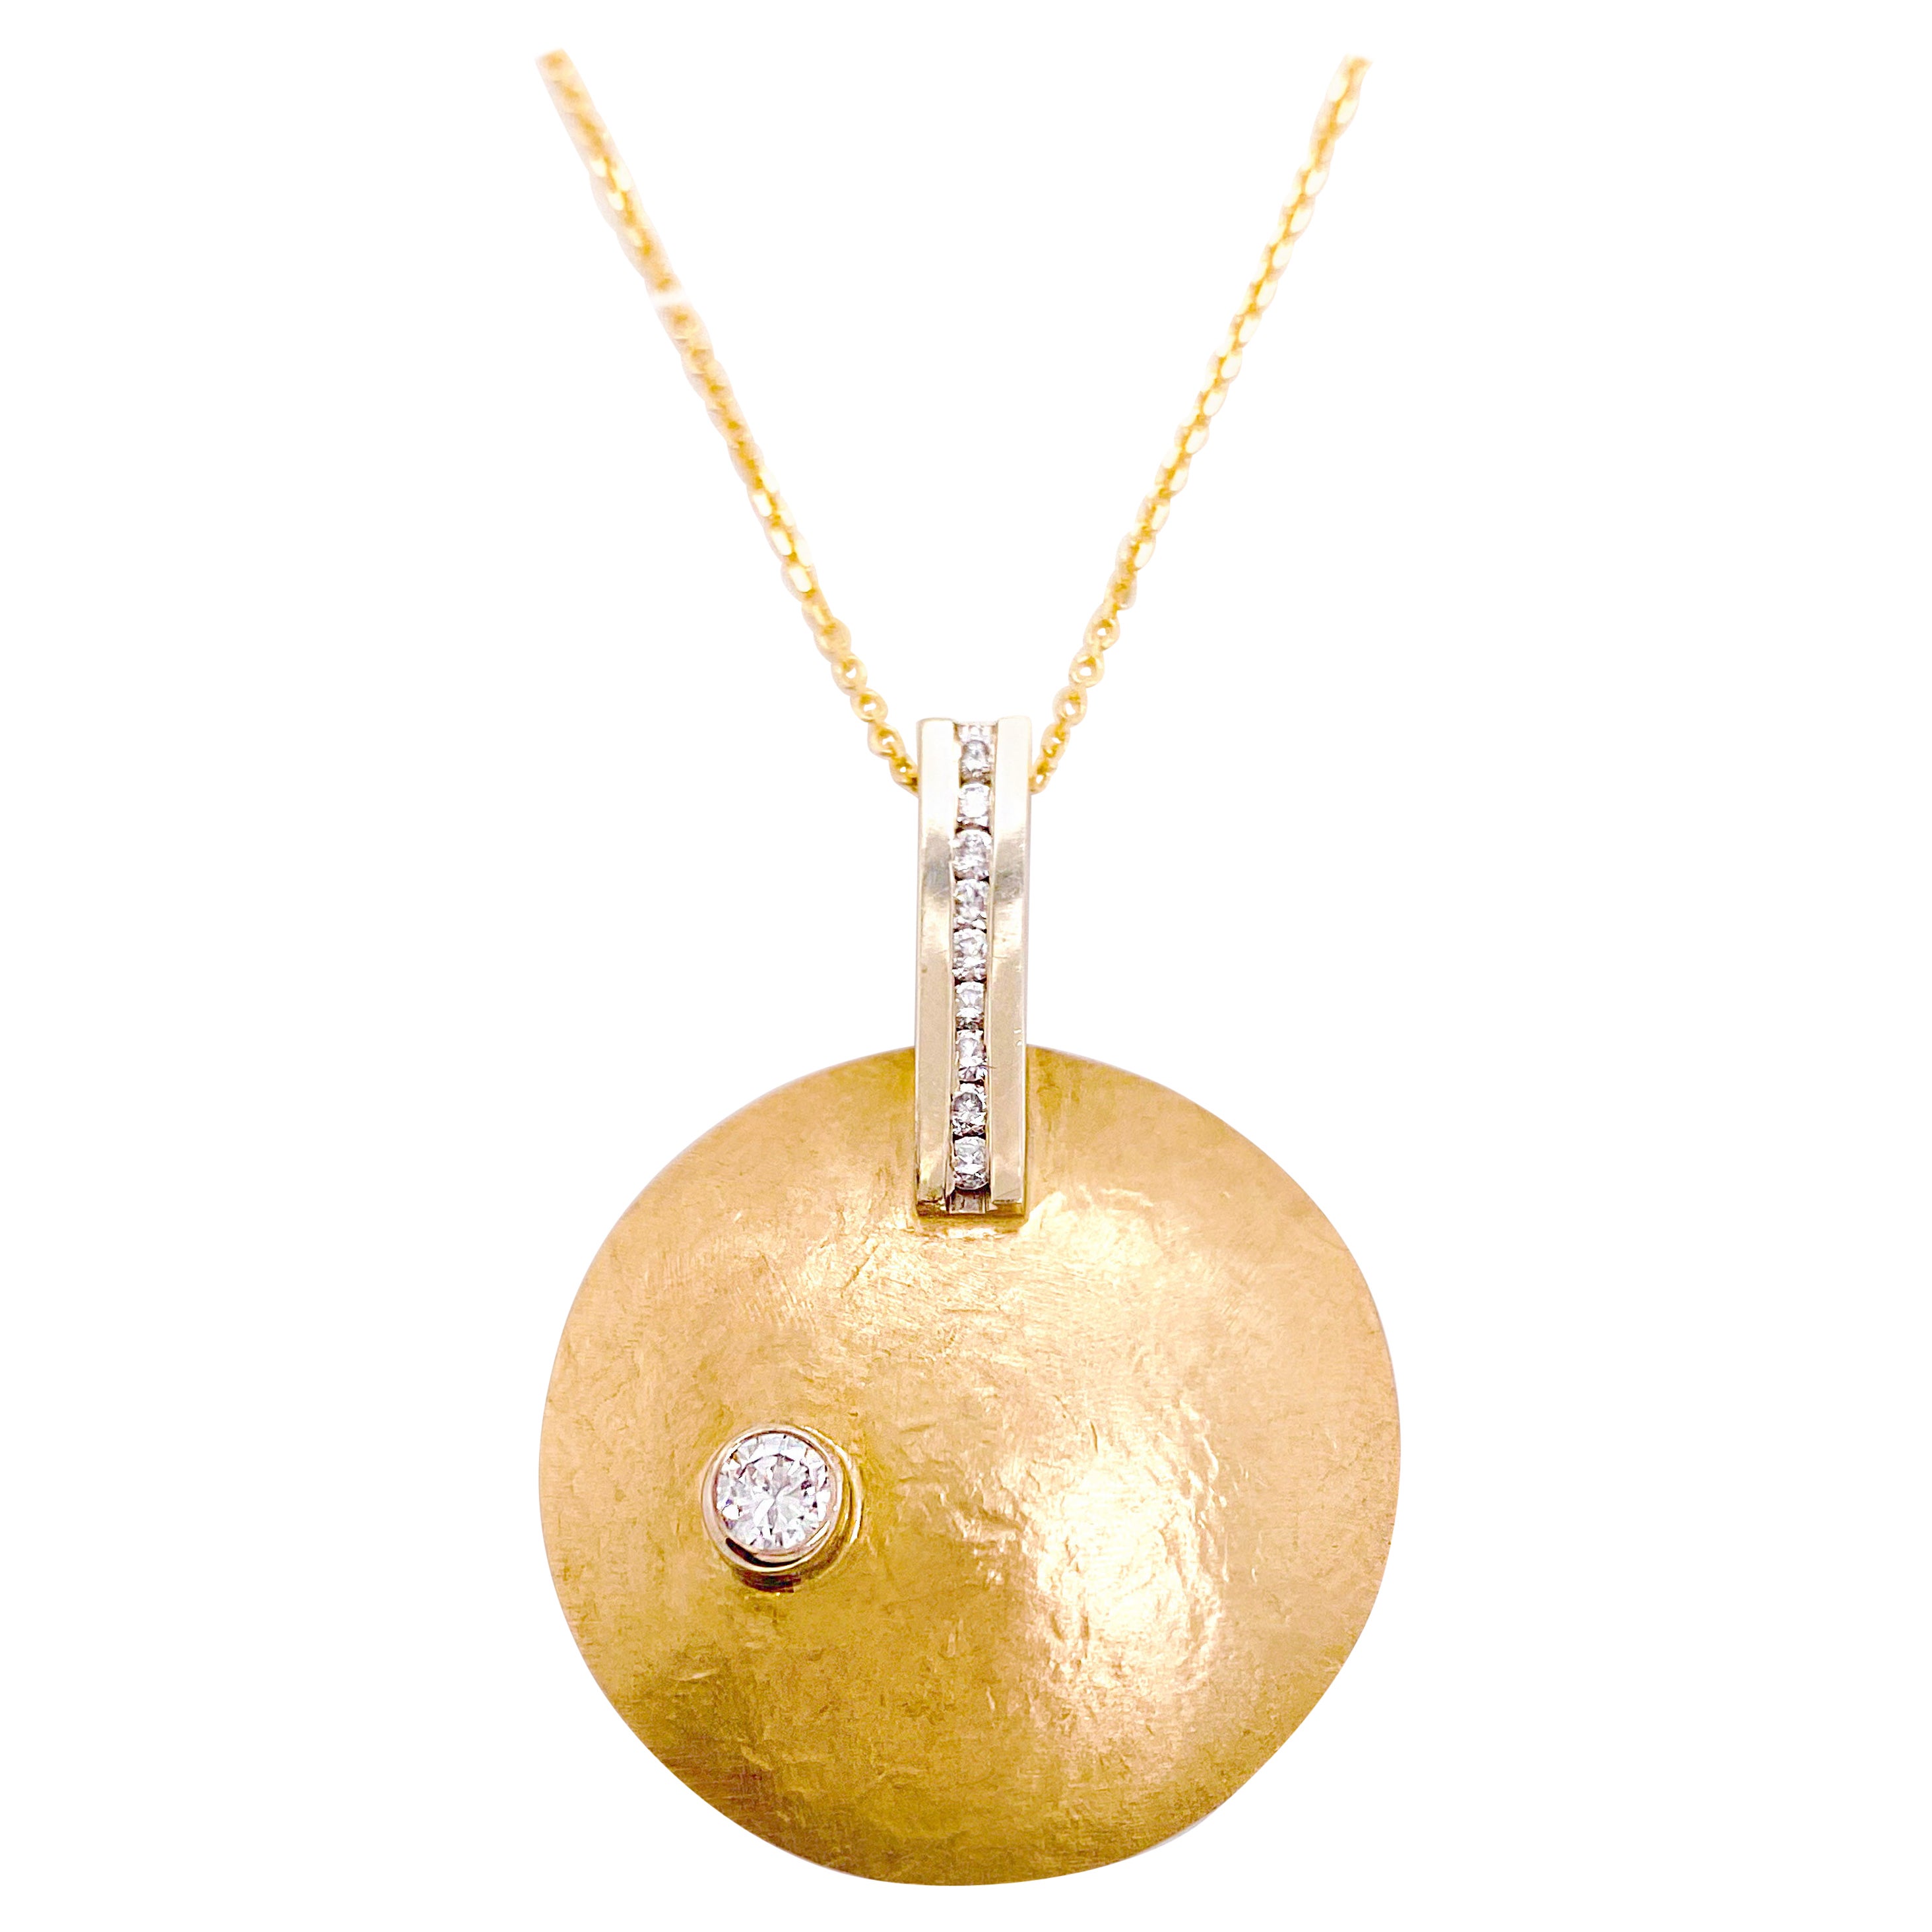 Gold Disk Diamond Pendant Necklace, Yellow Gold, Hammered Circle Pendant